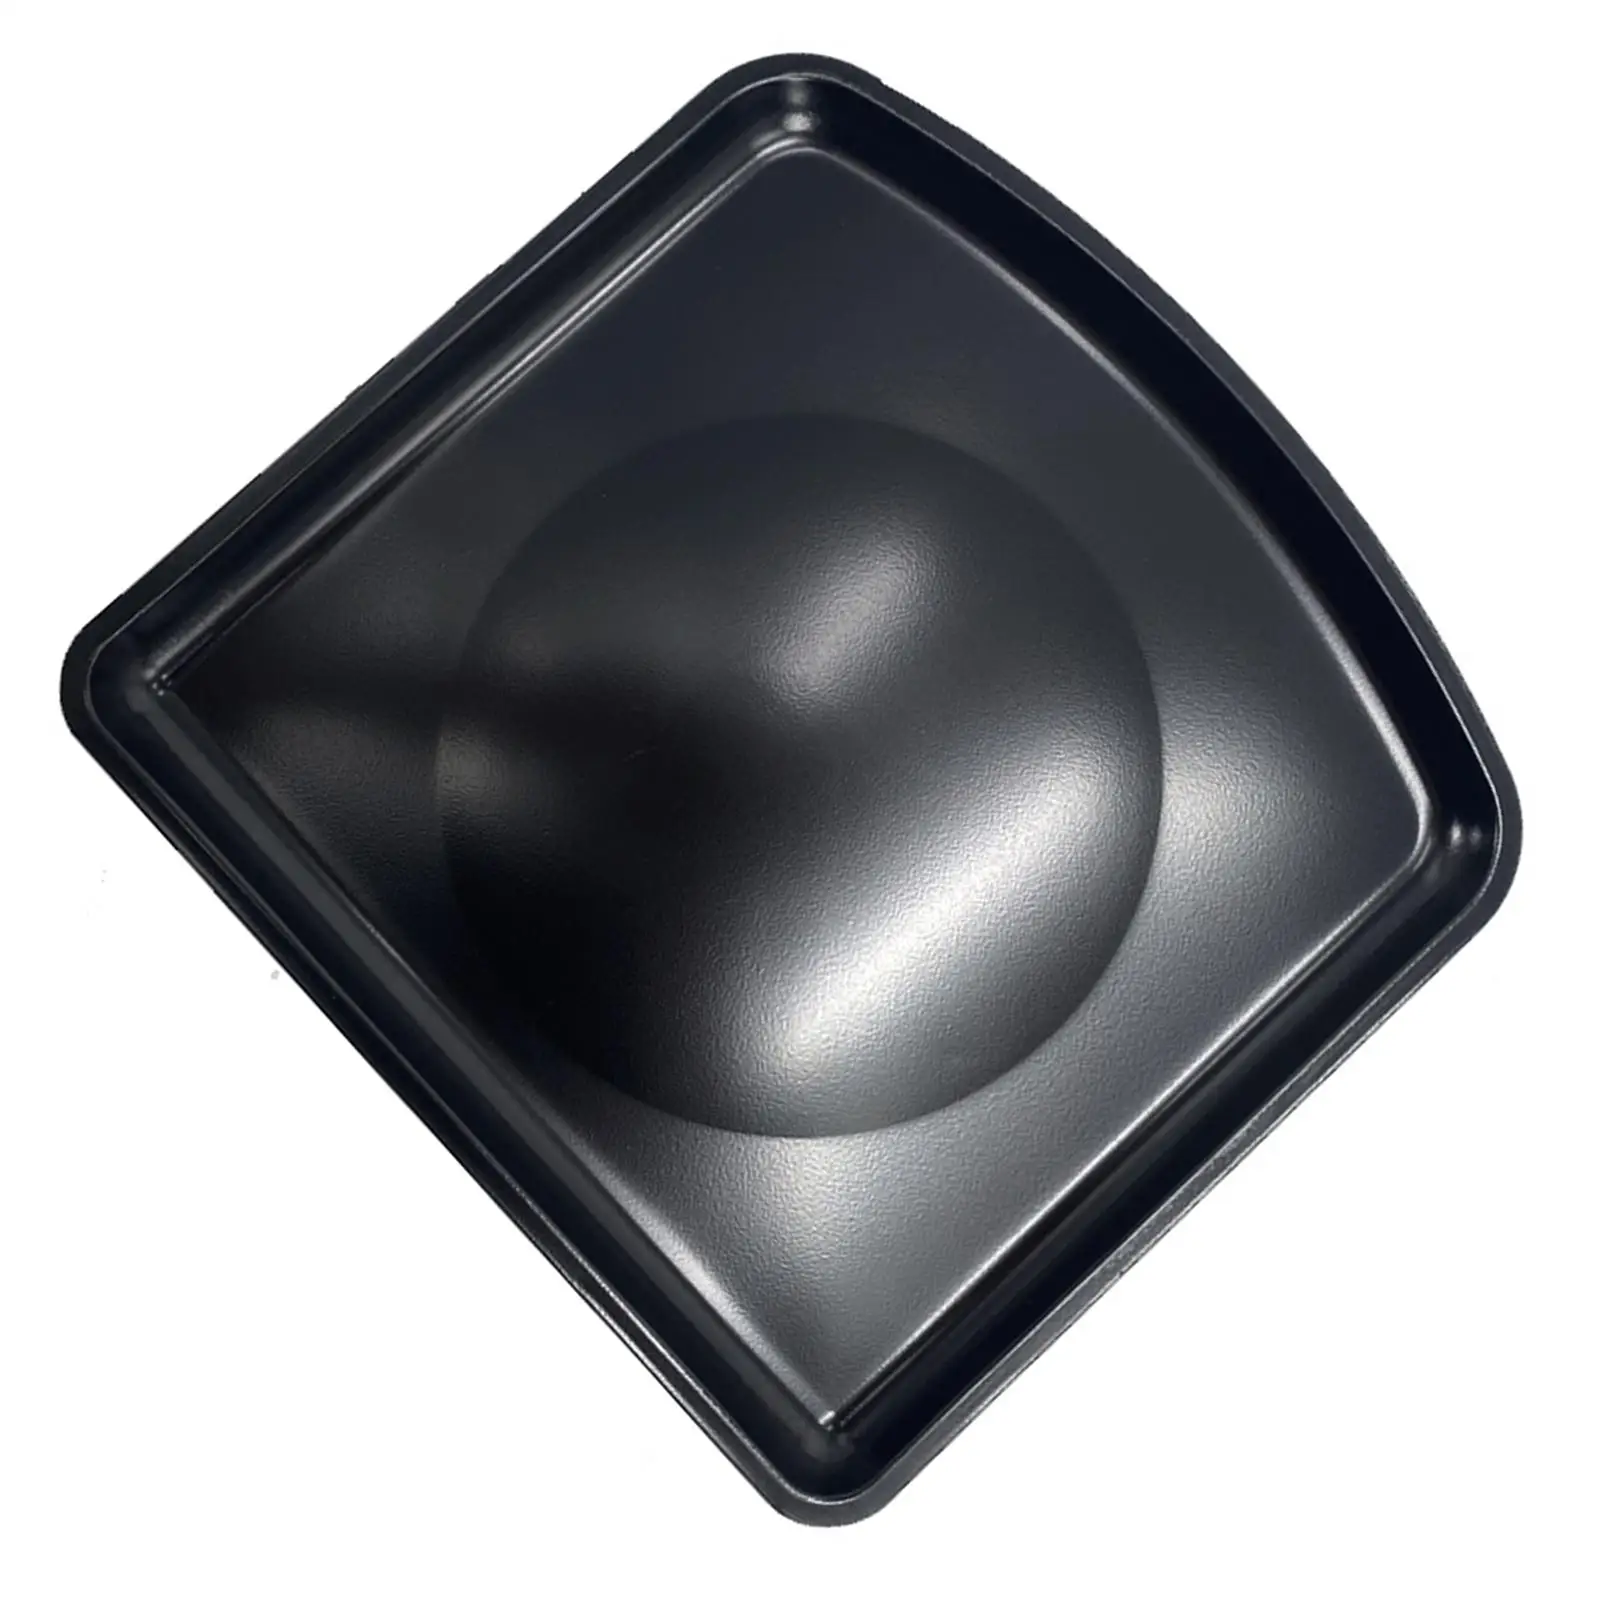 1PC Air Fryer Drip Tray Nonstick Coating Oil Drip Tray, 10inch, Black